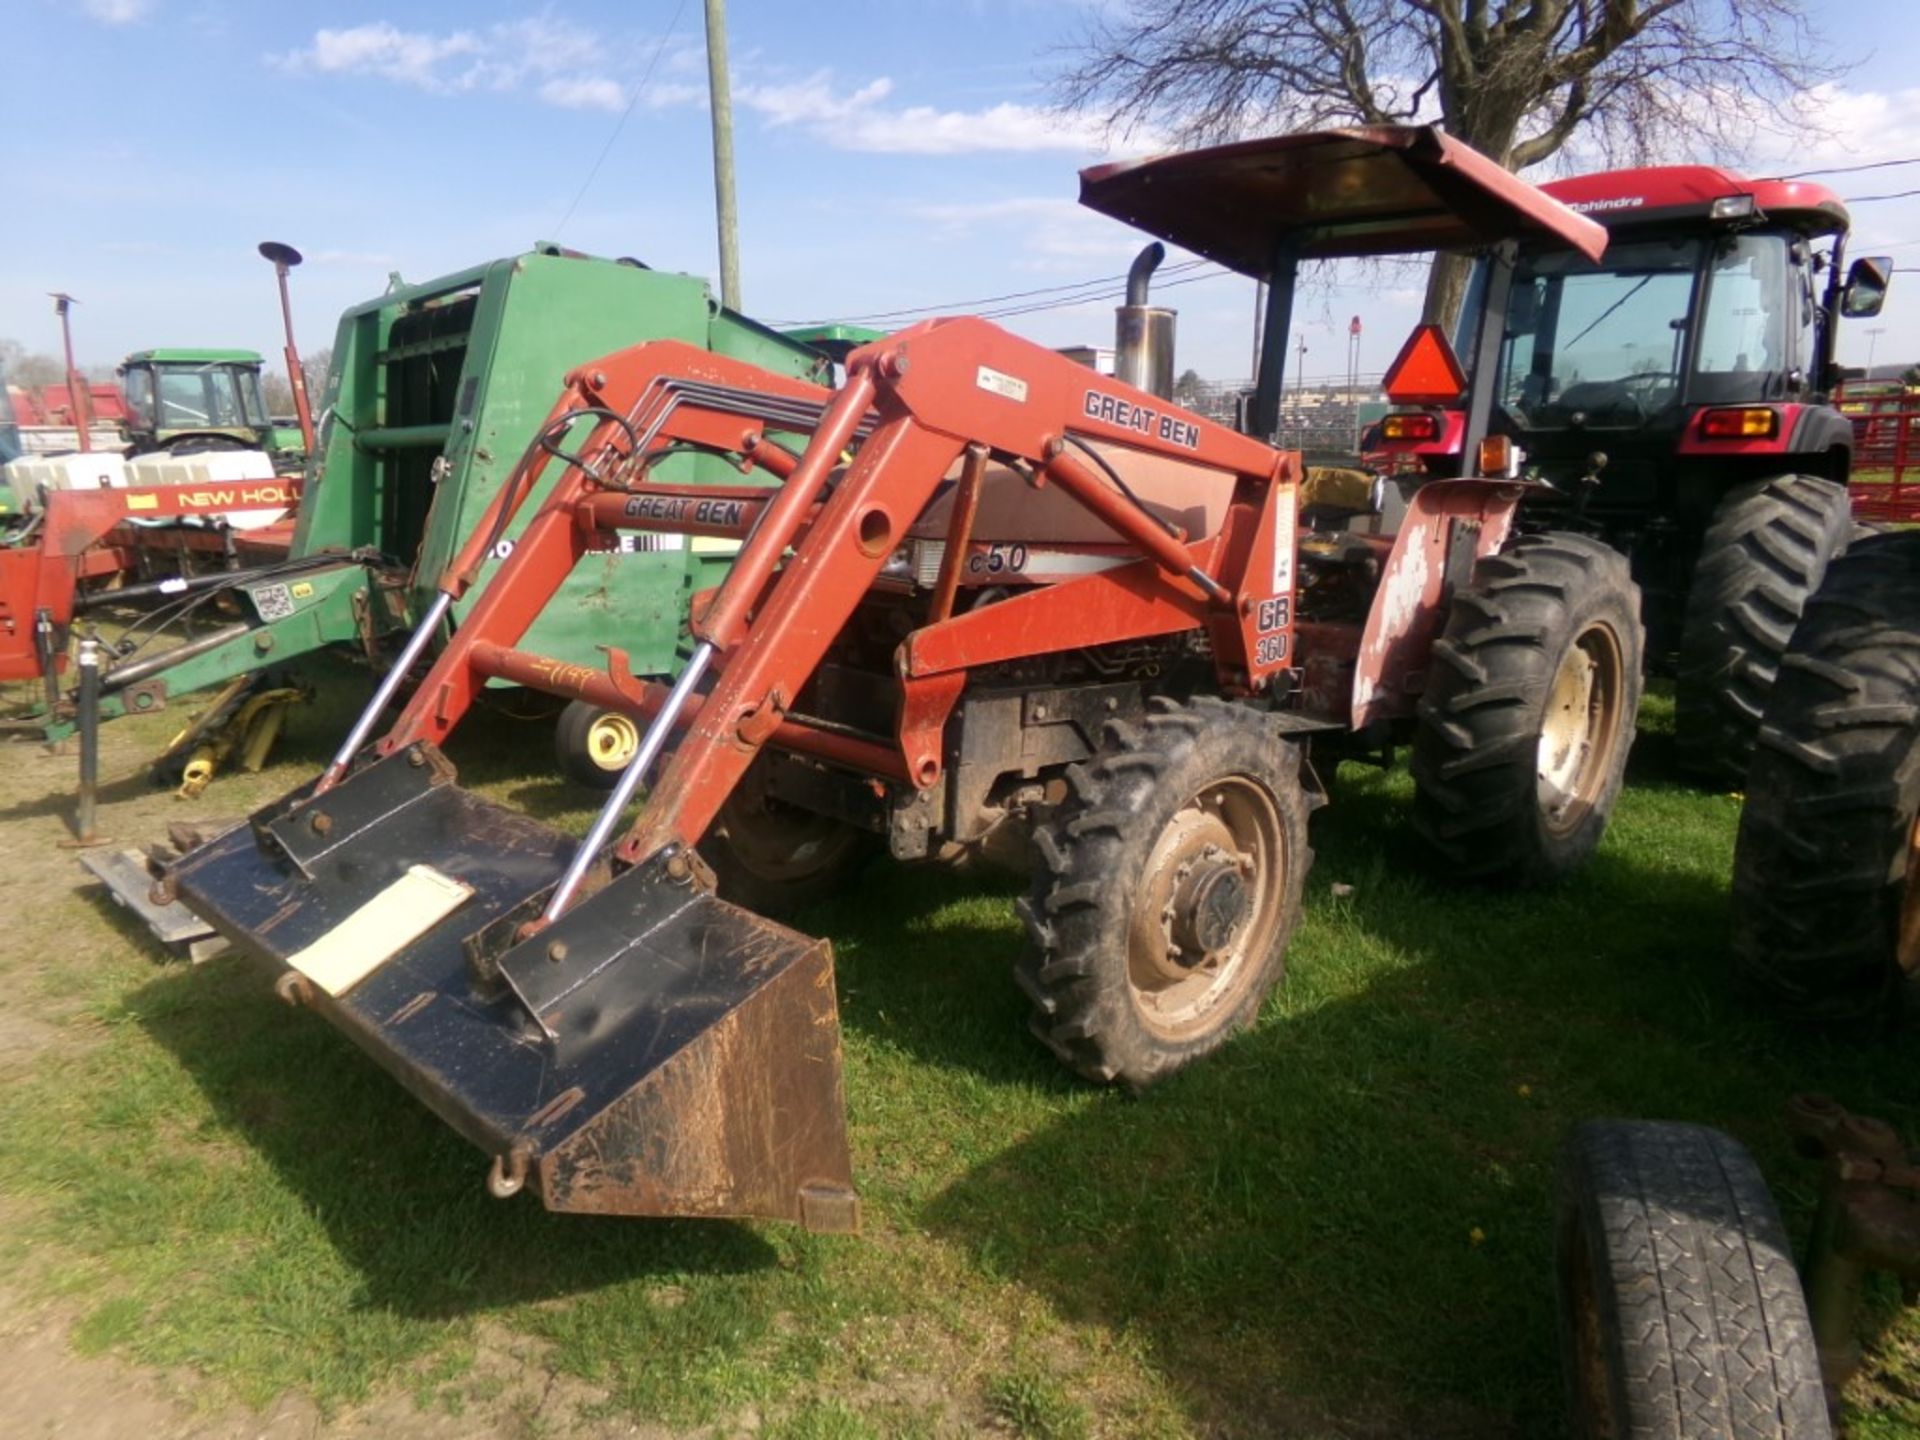 Case IH C-50 Tractor with Great Bend 300 Loader, 4 WD, NOT RUNNING-NEEDS WORK (4366)